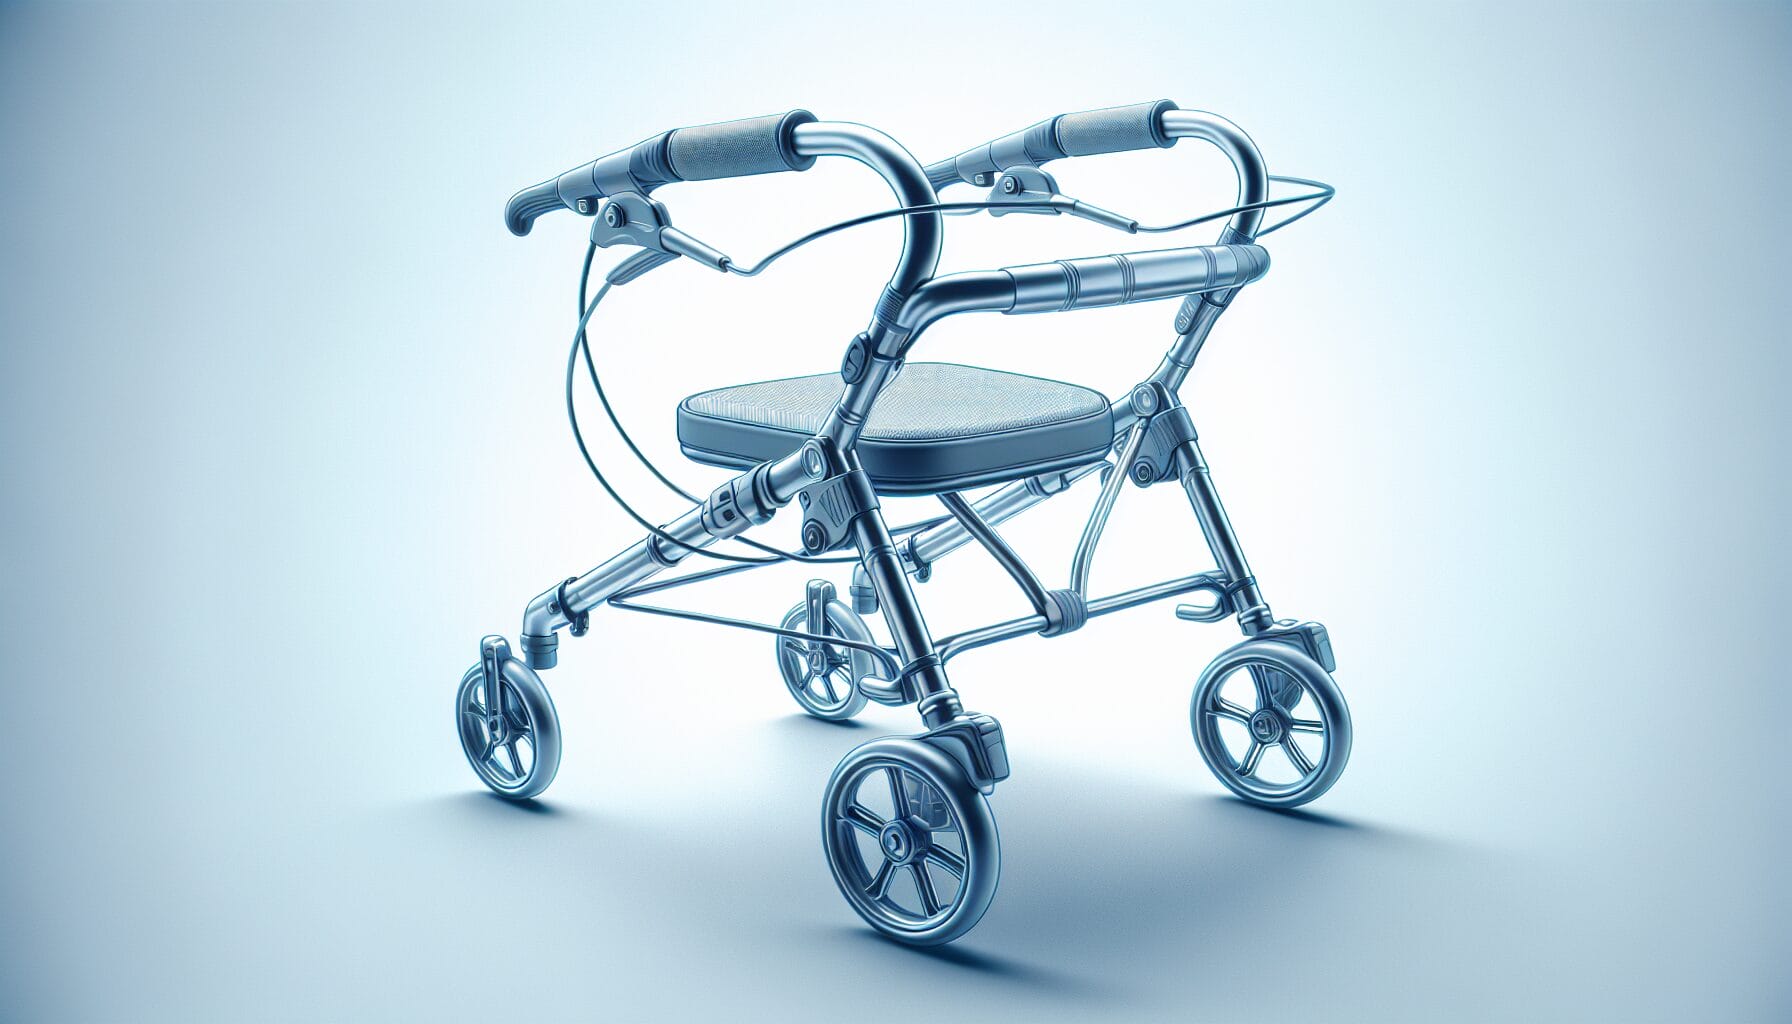 Illustration of a rollator with a lightweight frame, handlebars, and a built-in seat